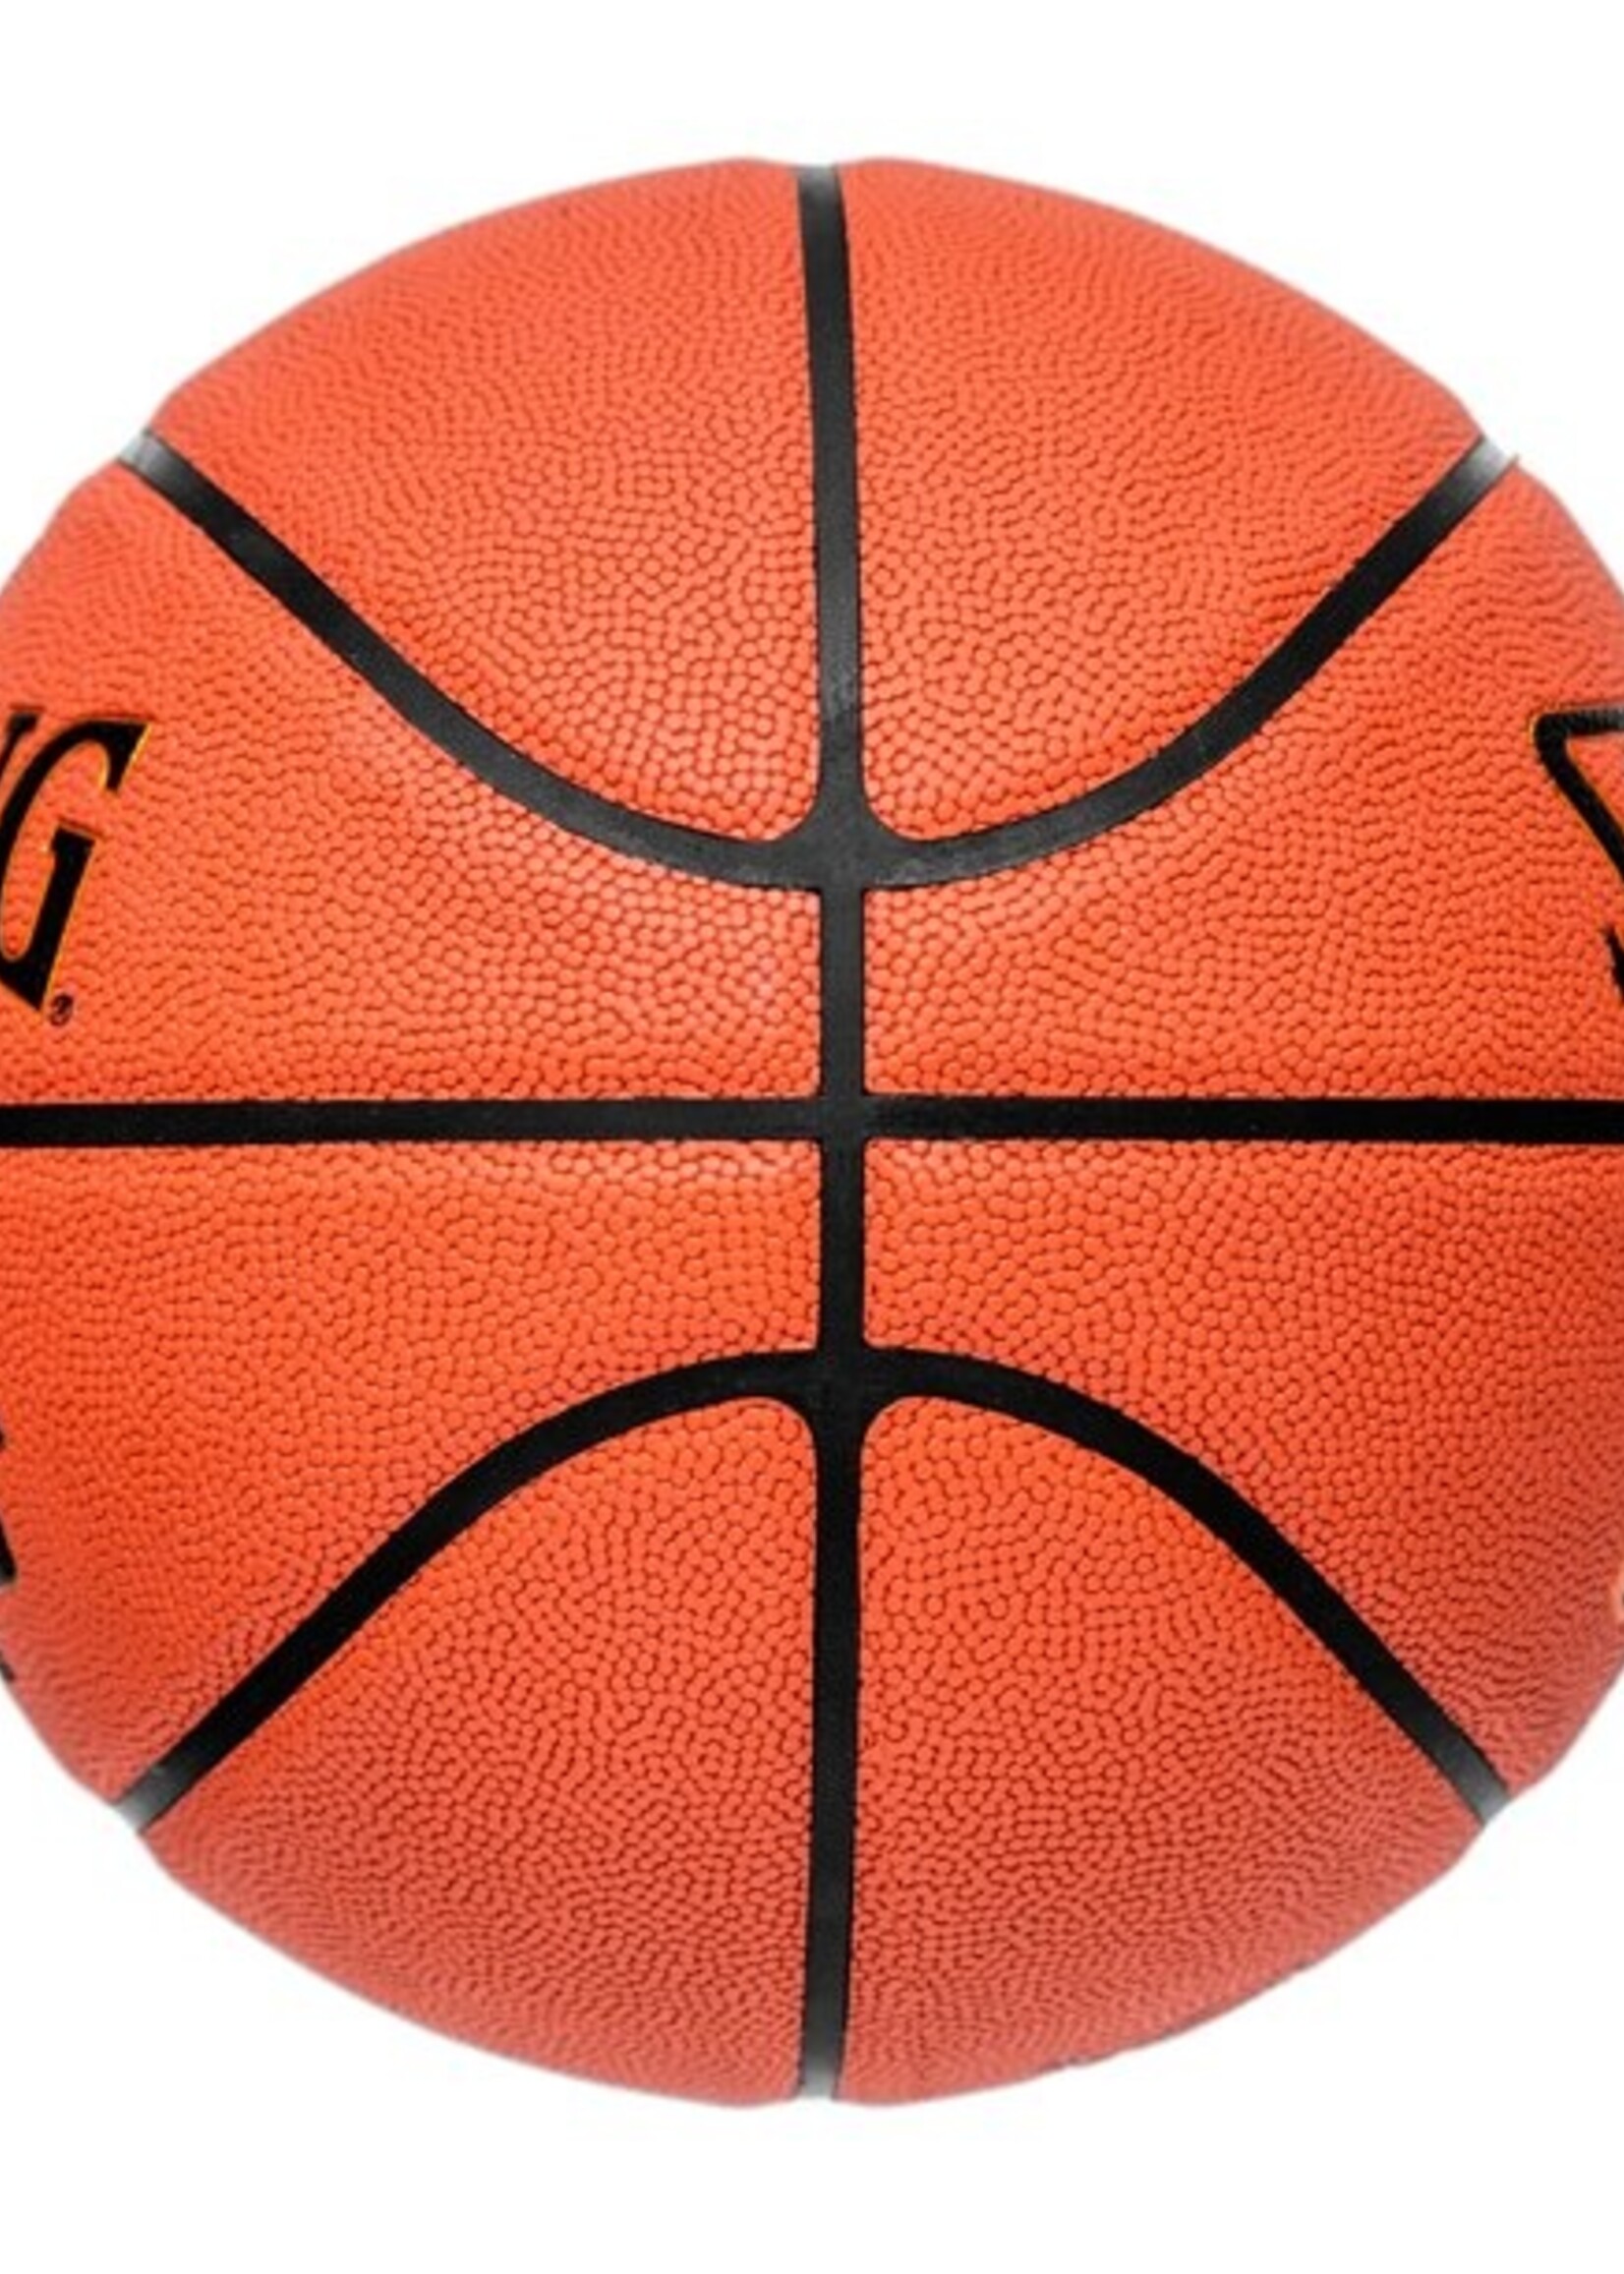 Spalding Excel TF-500 All-Surface-Basketball